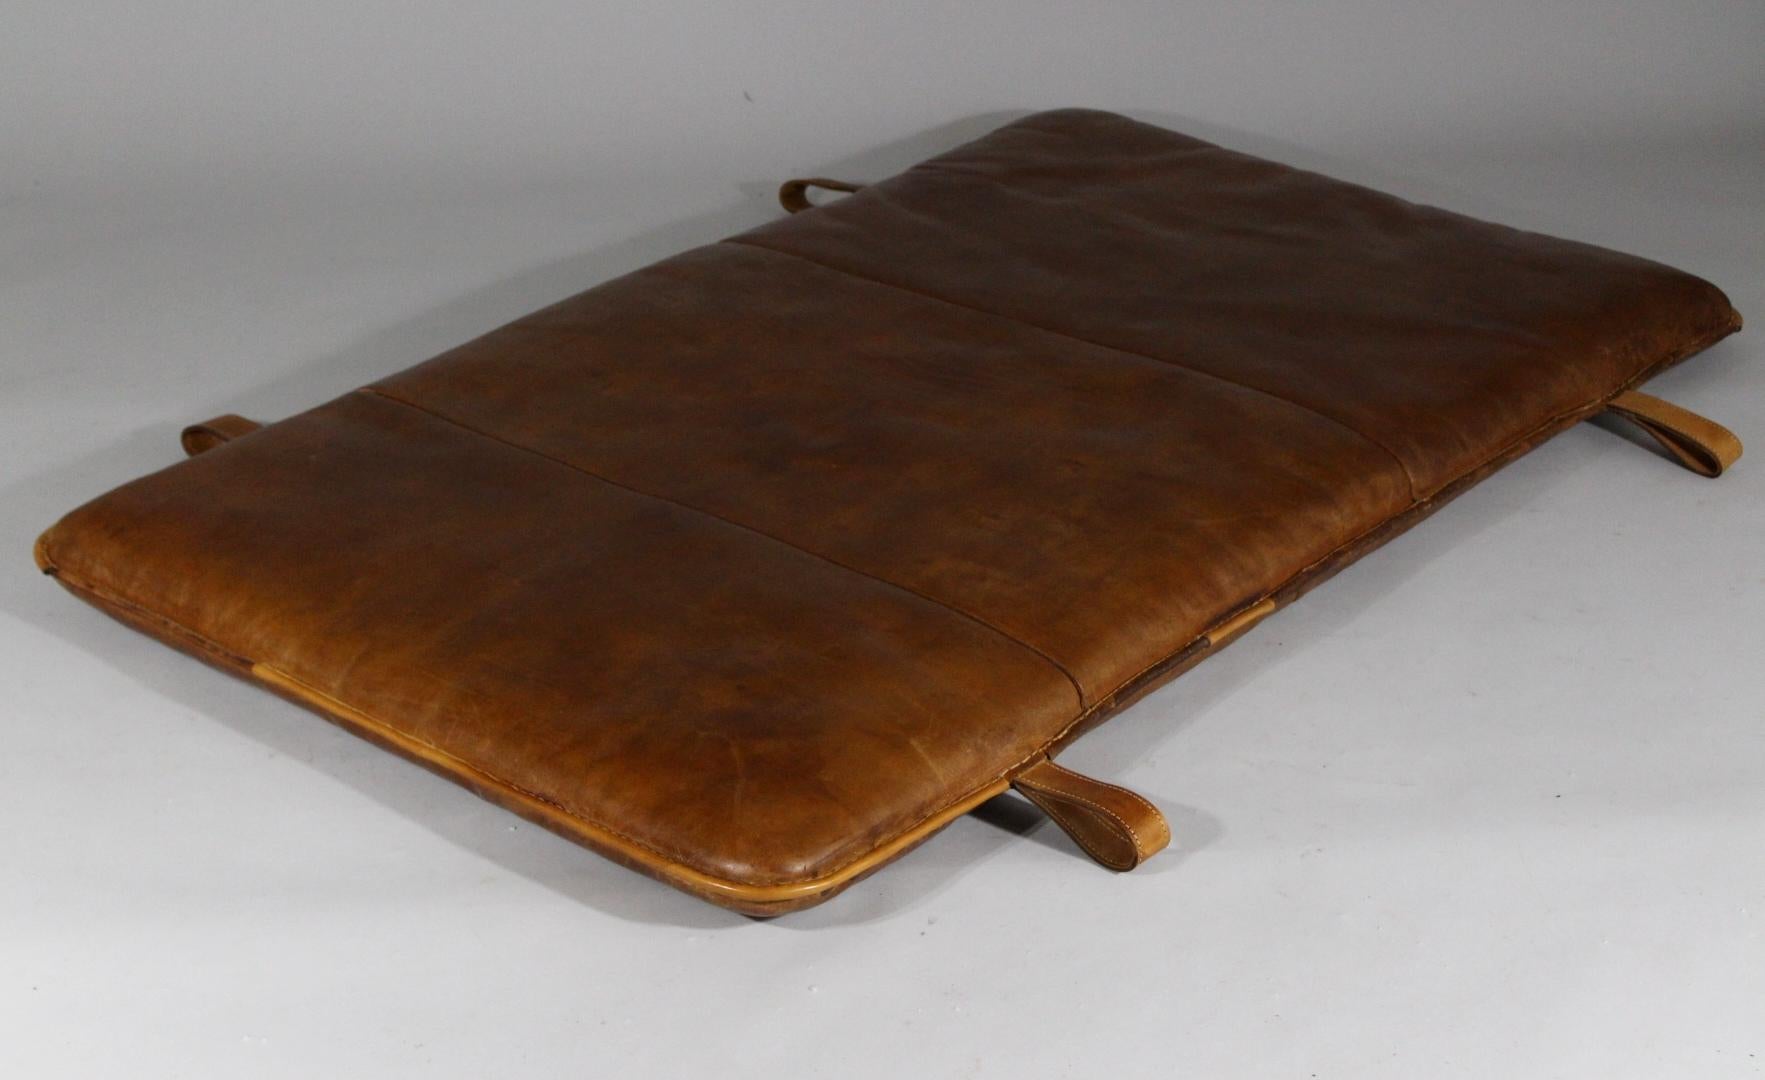 Leather gym mat from the 1930s. It has been made from a thick leather, good condition with patina.